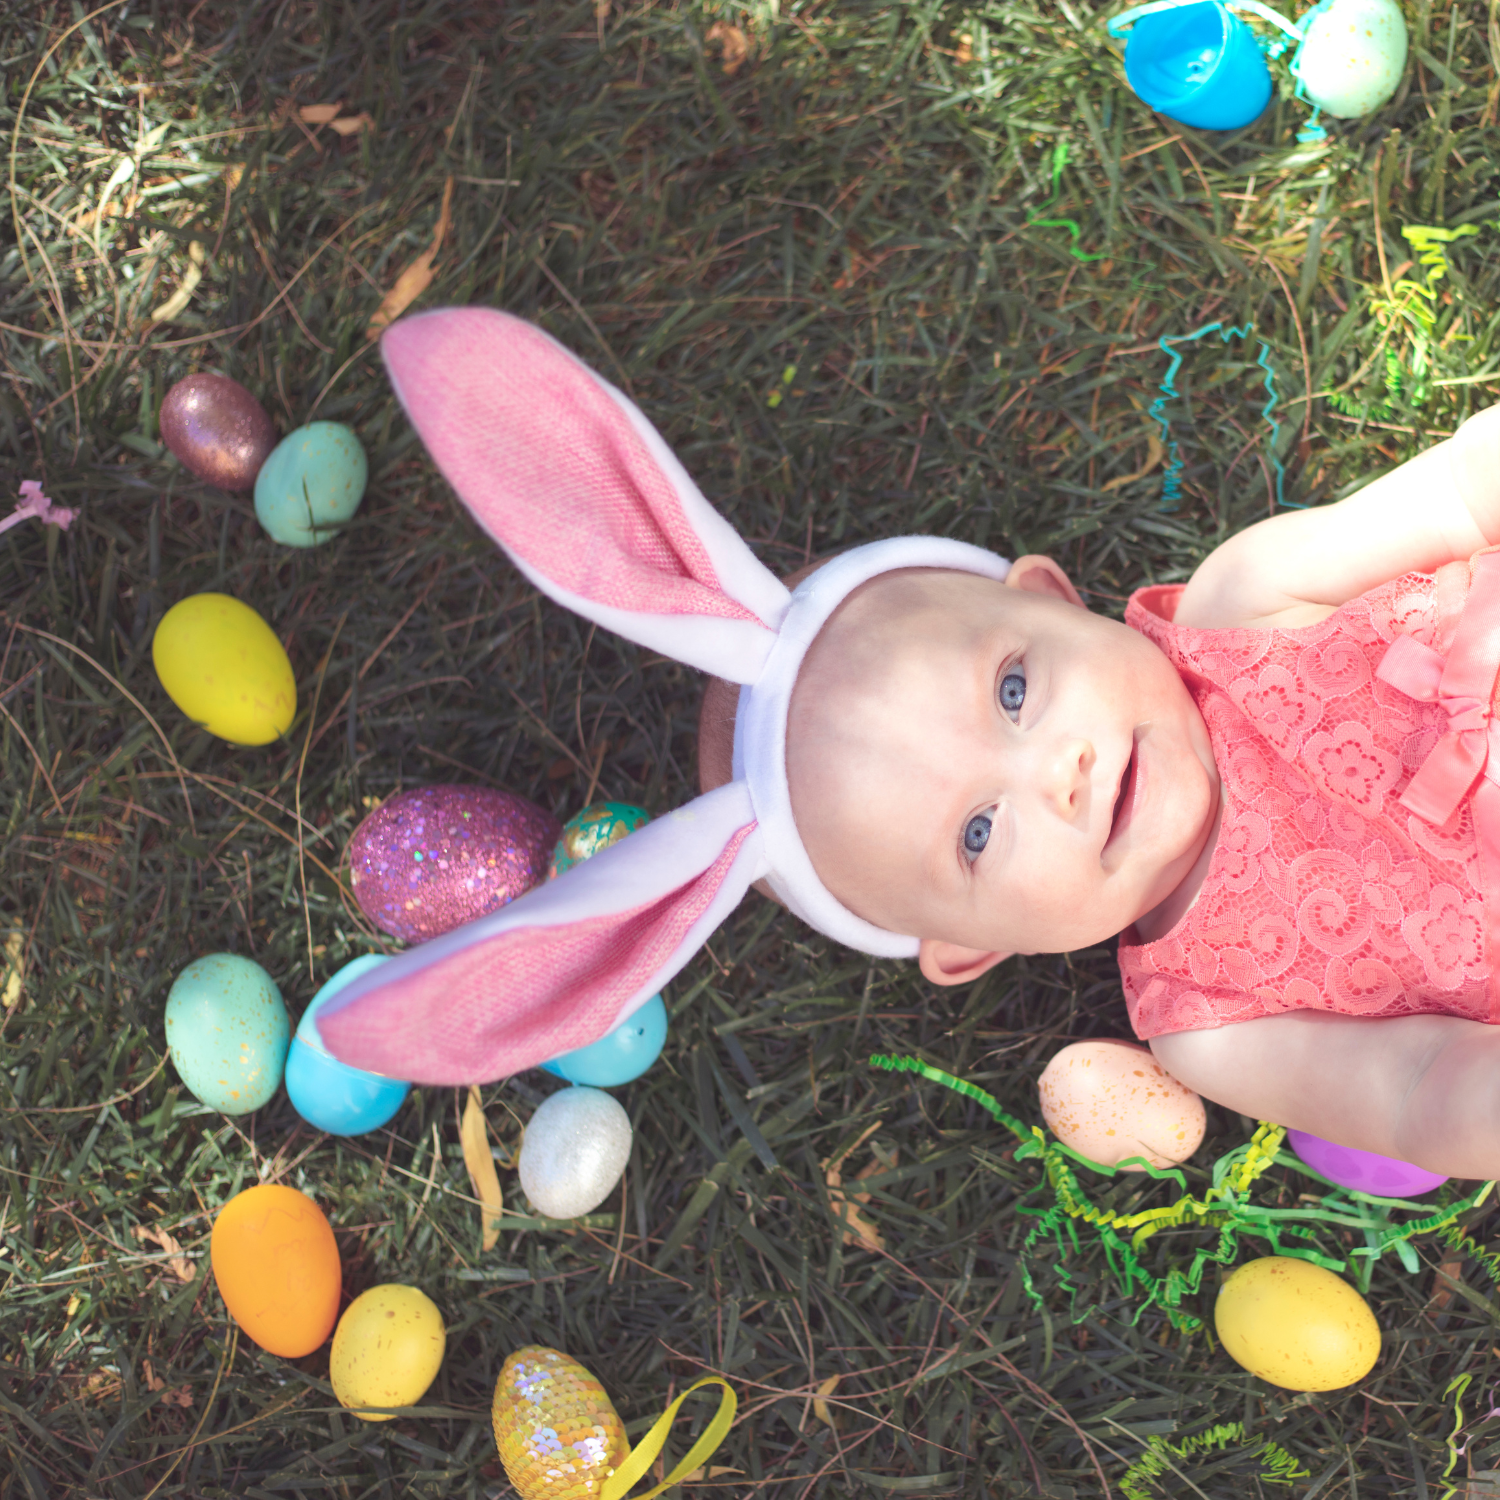 Toddler girl wearing bunny ears lying on the grass surrounded by plastic, fillable Easter eggs - Clair de Lune UK